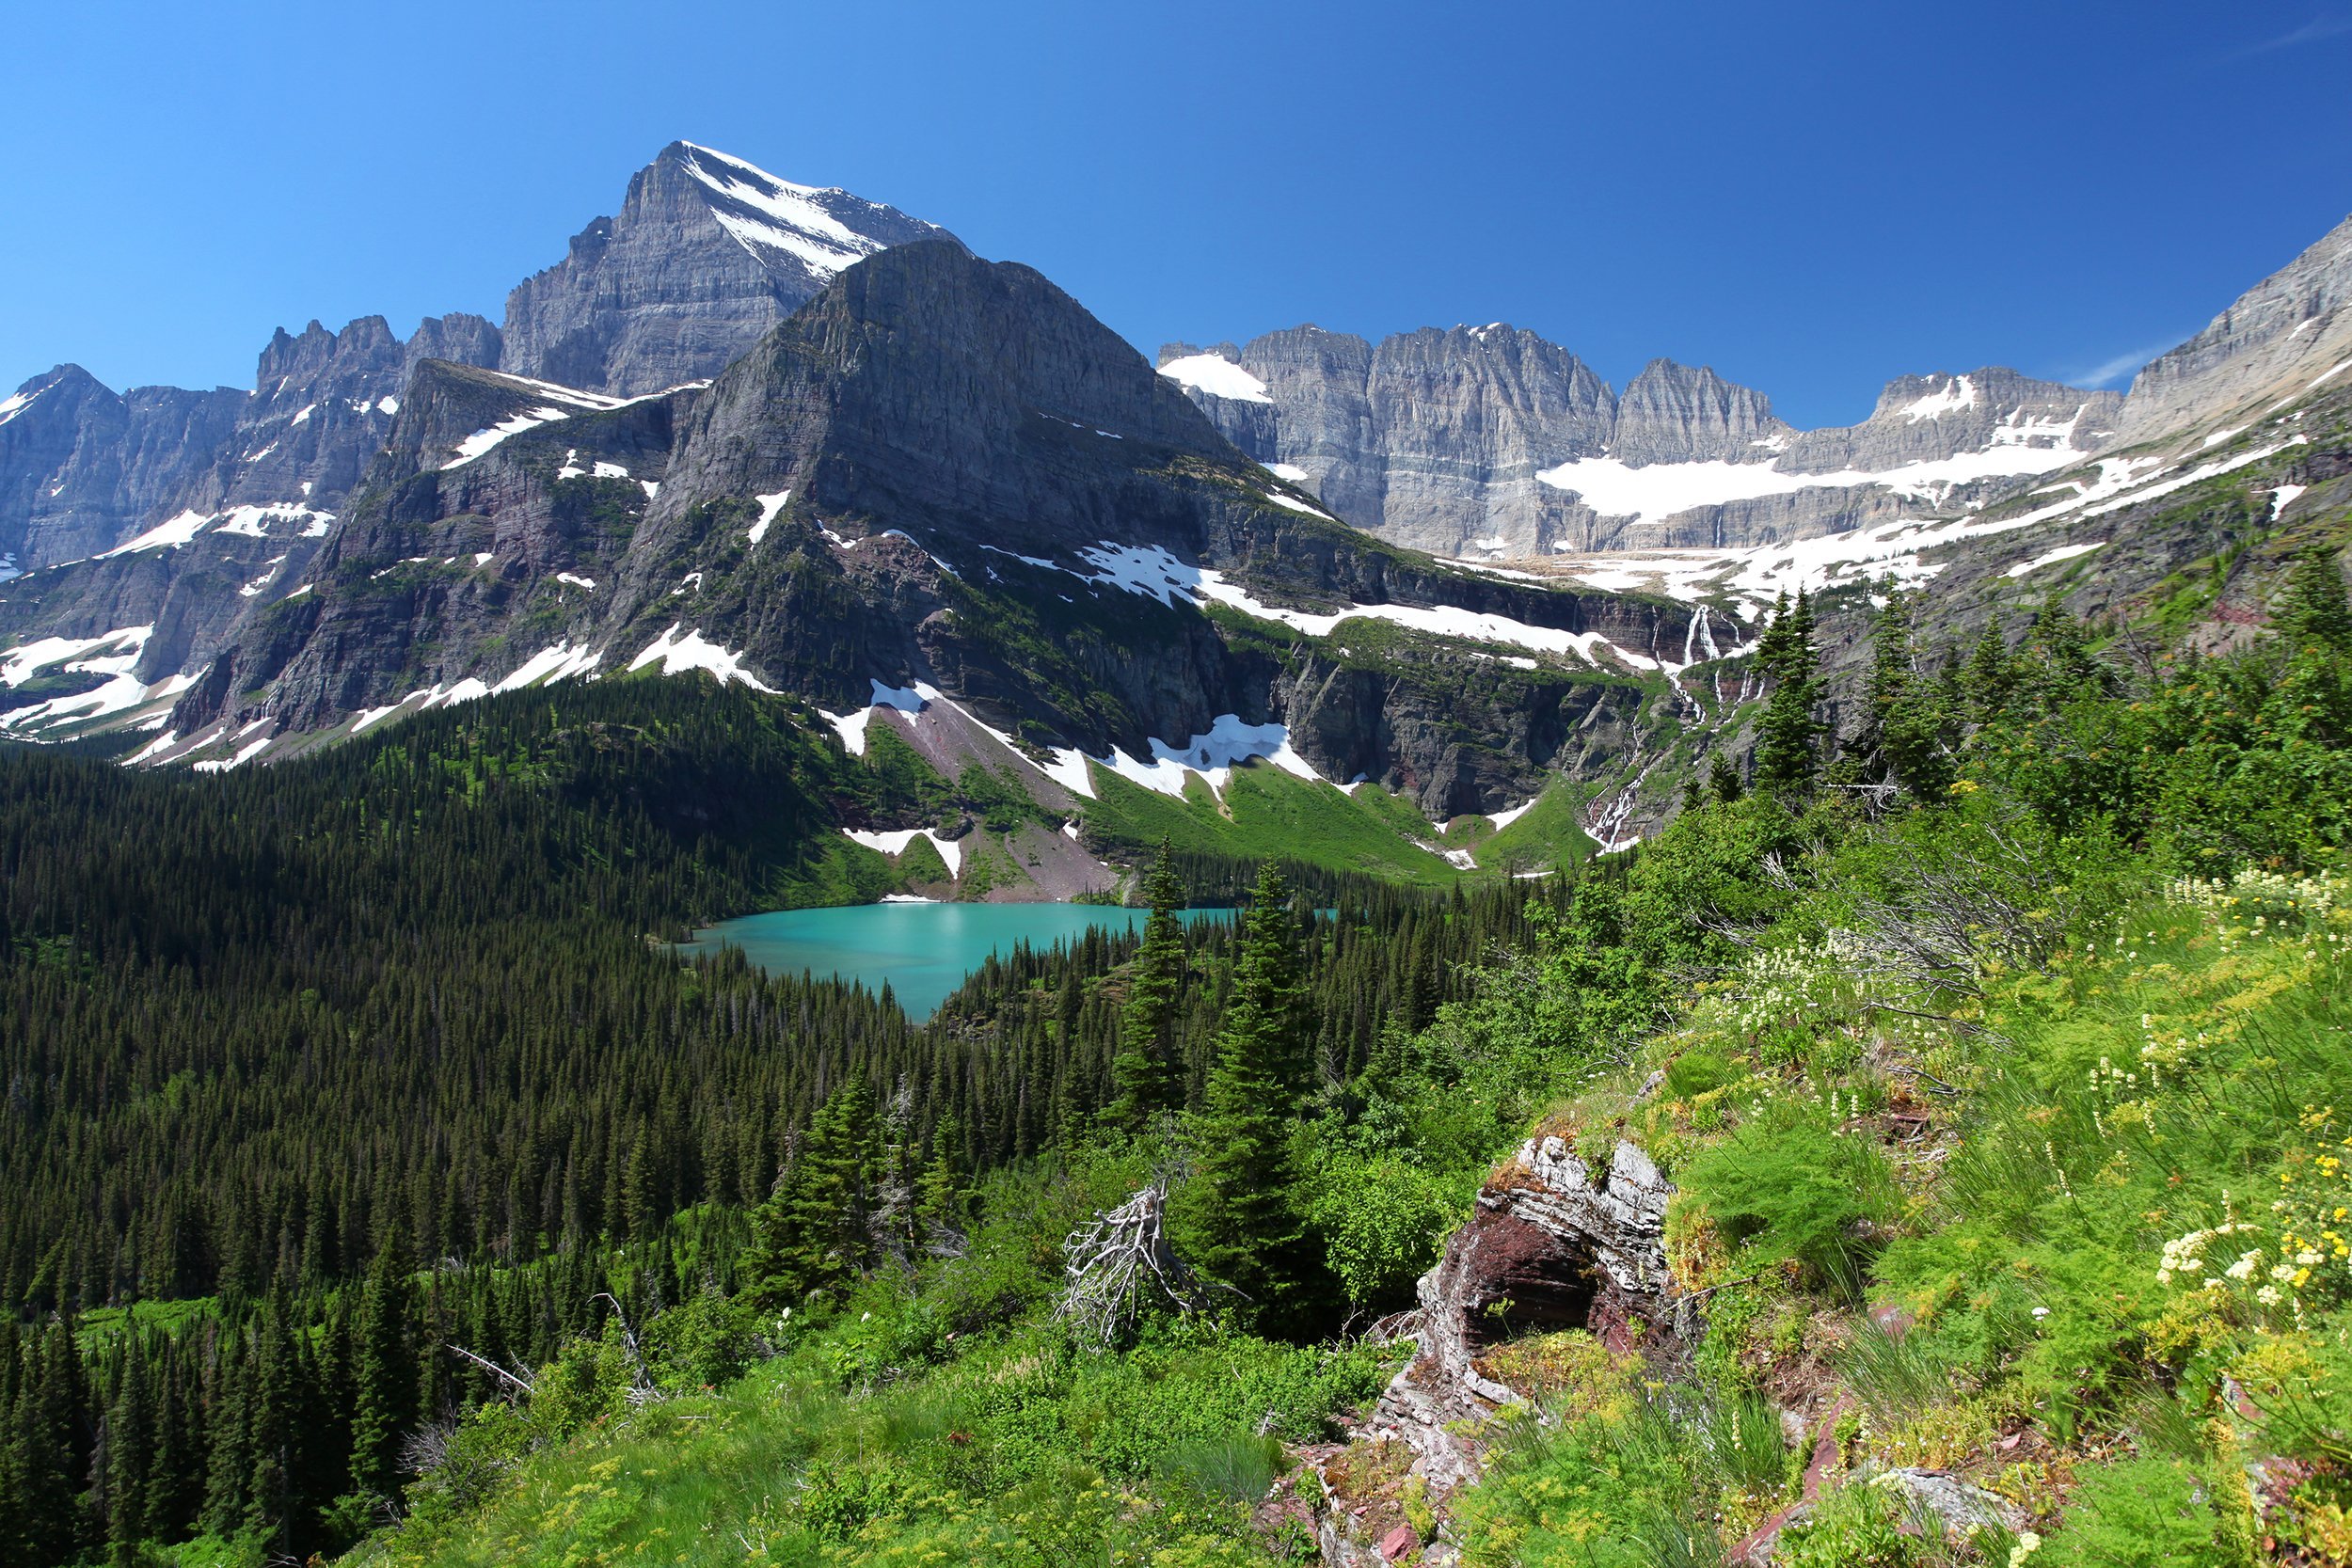 <p><a href="https://www.nps.gov/glac/index.htm">Glacier National Park</a> covers more than 1 million acres and is renowned for its breathtaking beauty and rugged terrain. Iconic Red Bus tours and a free shuttle system travel along Going-to-the-Sun Road, a 50-mile route with unparalleled scenic vistas. Guests can stay at one of 13 drive-in campgrounds, backcountry chalets, cabins, and historic hotels. Spaces fill quickly, so it pays to book early. <a href="https://www.glaciernationalparklodges.com/red-bus-tours">Red Bus tour</a> booking is underway.</p><p><b>Related:</b> <a href="https://blog.cheapism.com/bucket-list-roads/">Bucket List Roads to Drive Around the World</a></p>